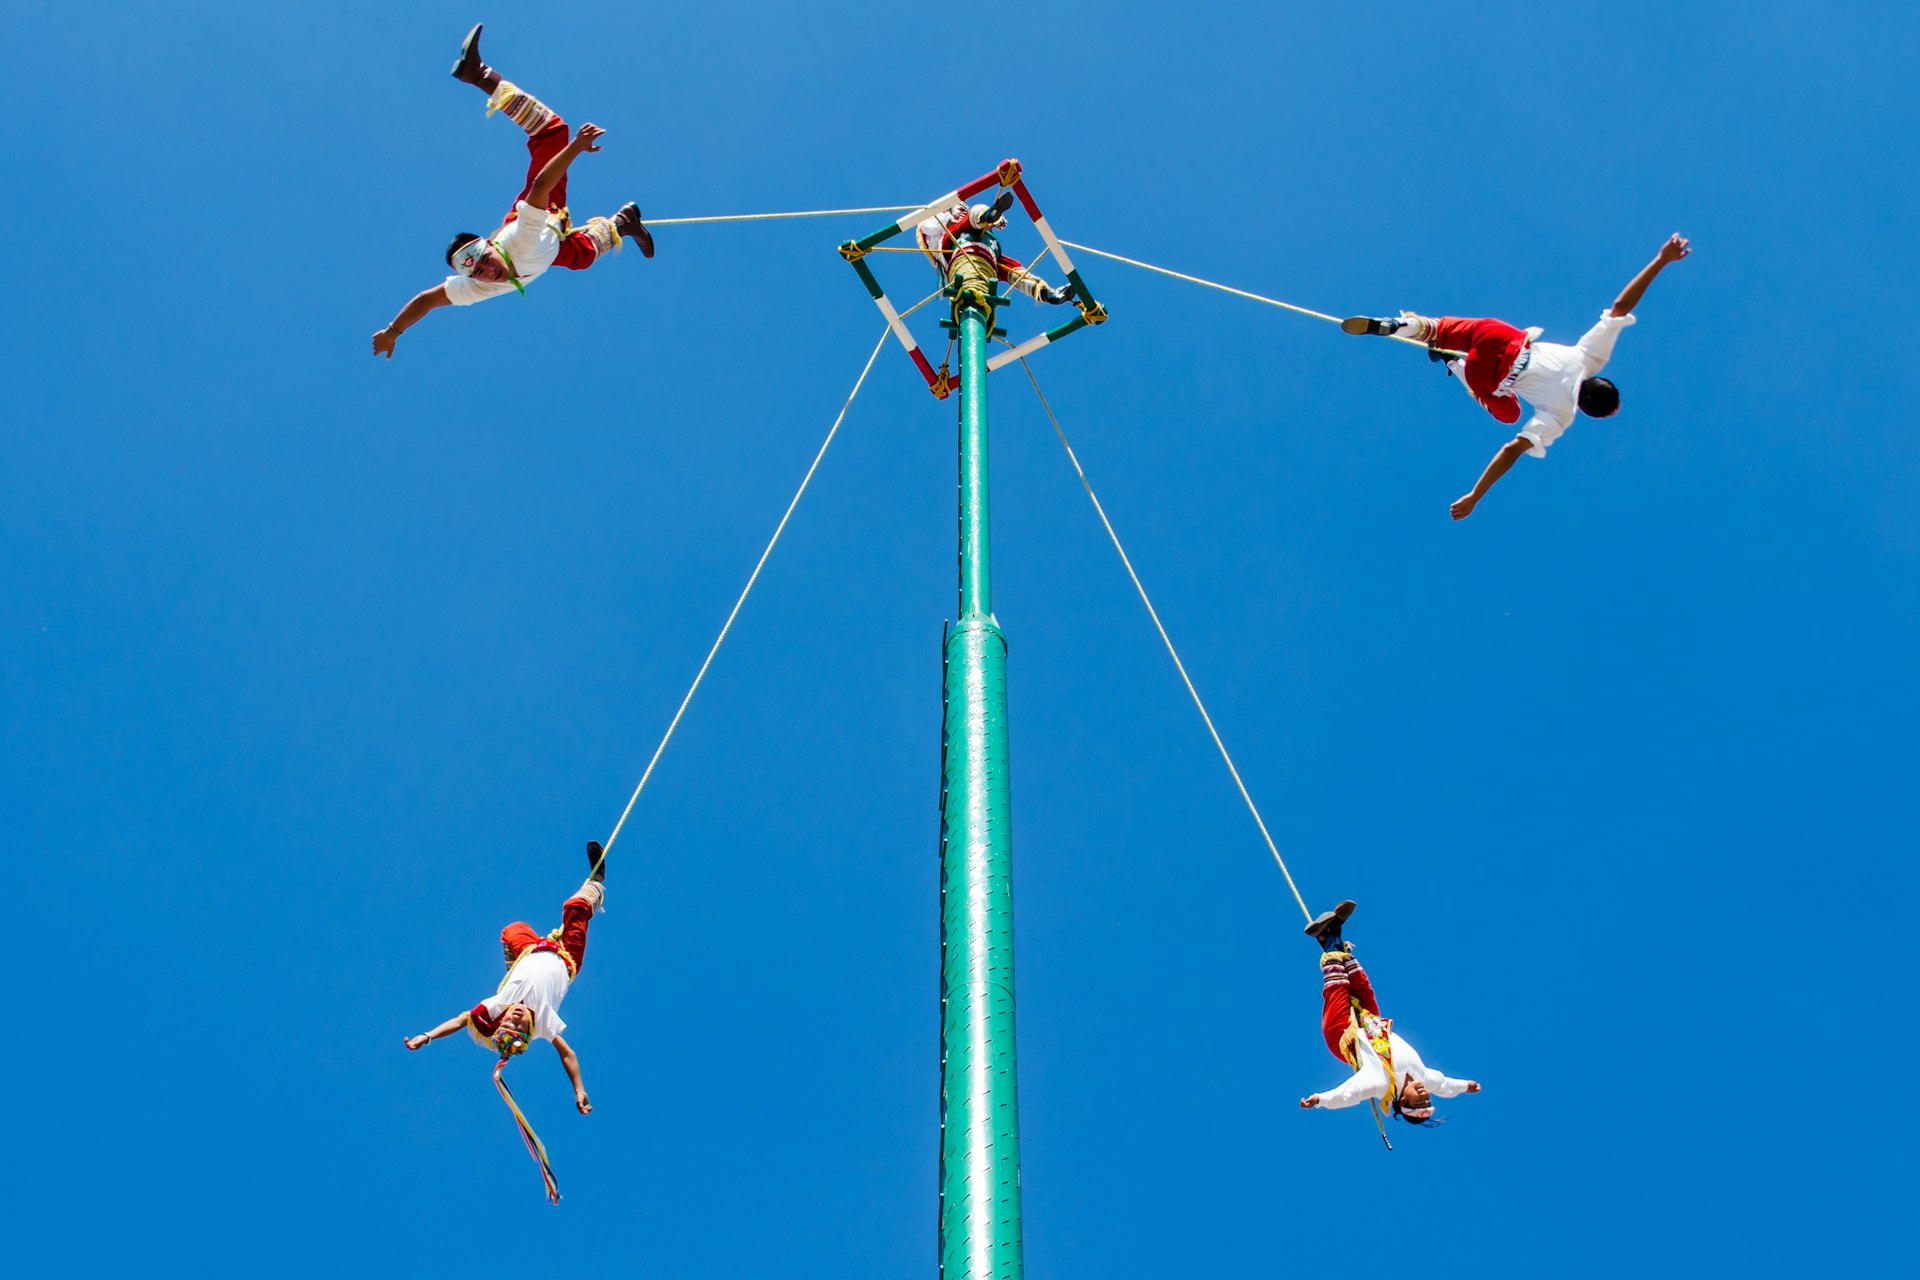 A group of men dressed in red suspended from a central pole - Voladores de Papantla